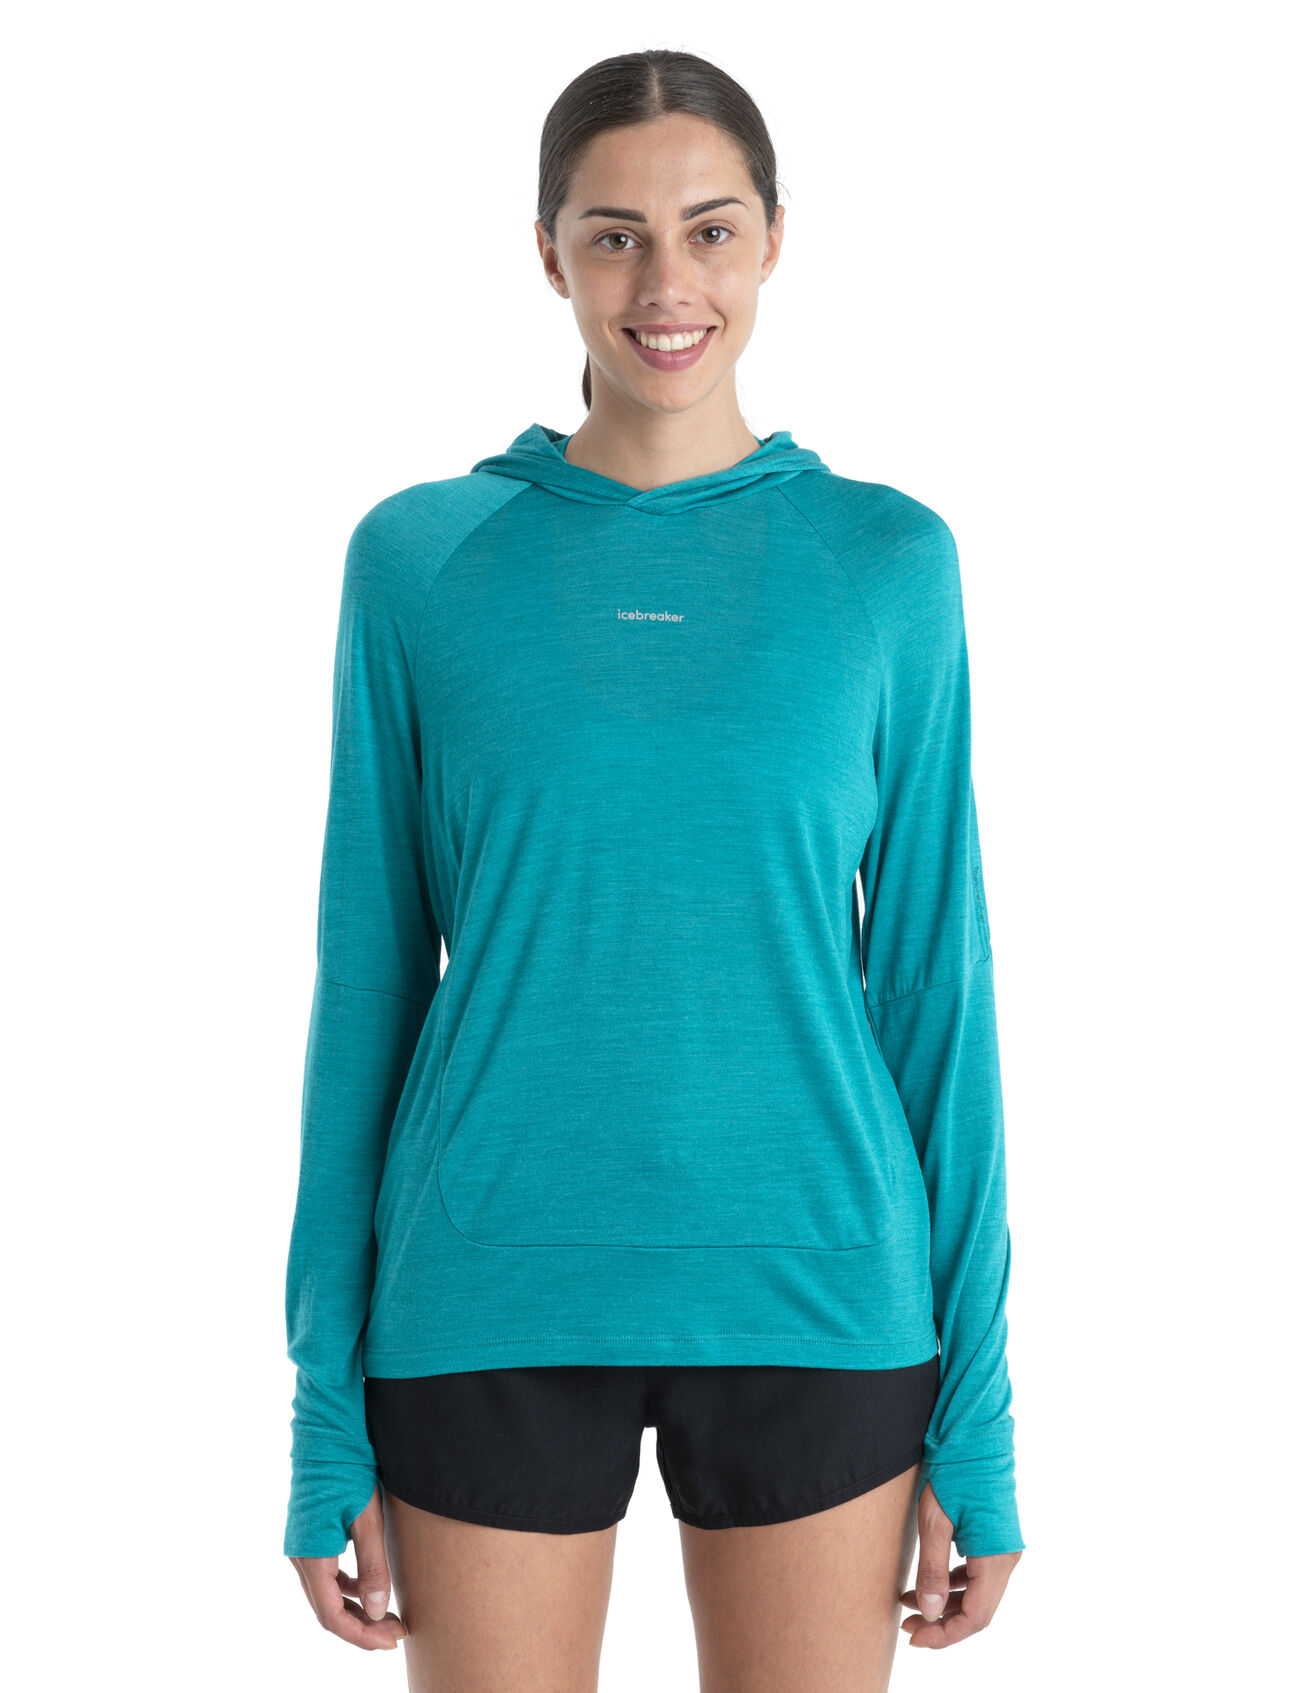 Womens 125 Cool-Lite™ Sphere Merino Long Sleeve Hoodie A lightweight and breathable performance hoodie designed for aerobic days outside, the Cool-Lite™ Long Sleeve Hoodie features our moisture-wicking Cool-Lite™ merino jersey fabric.